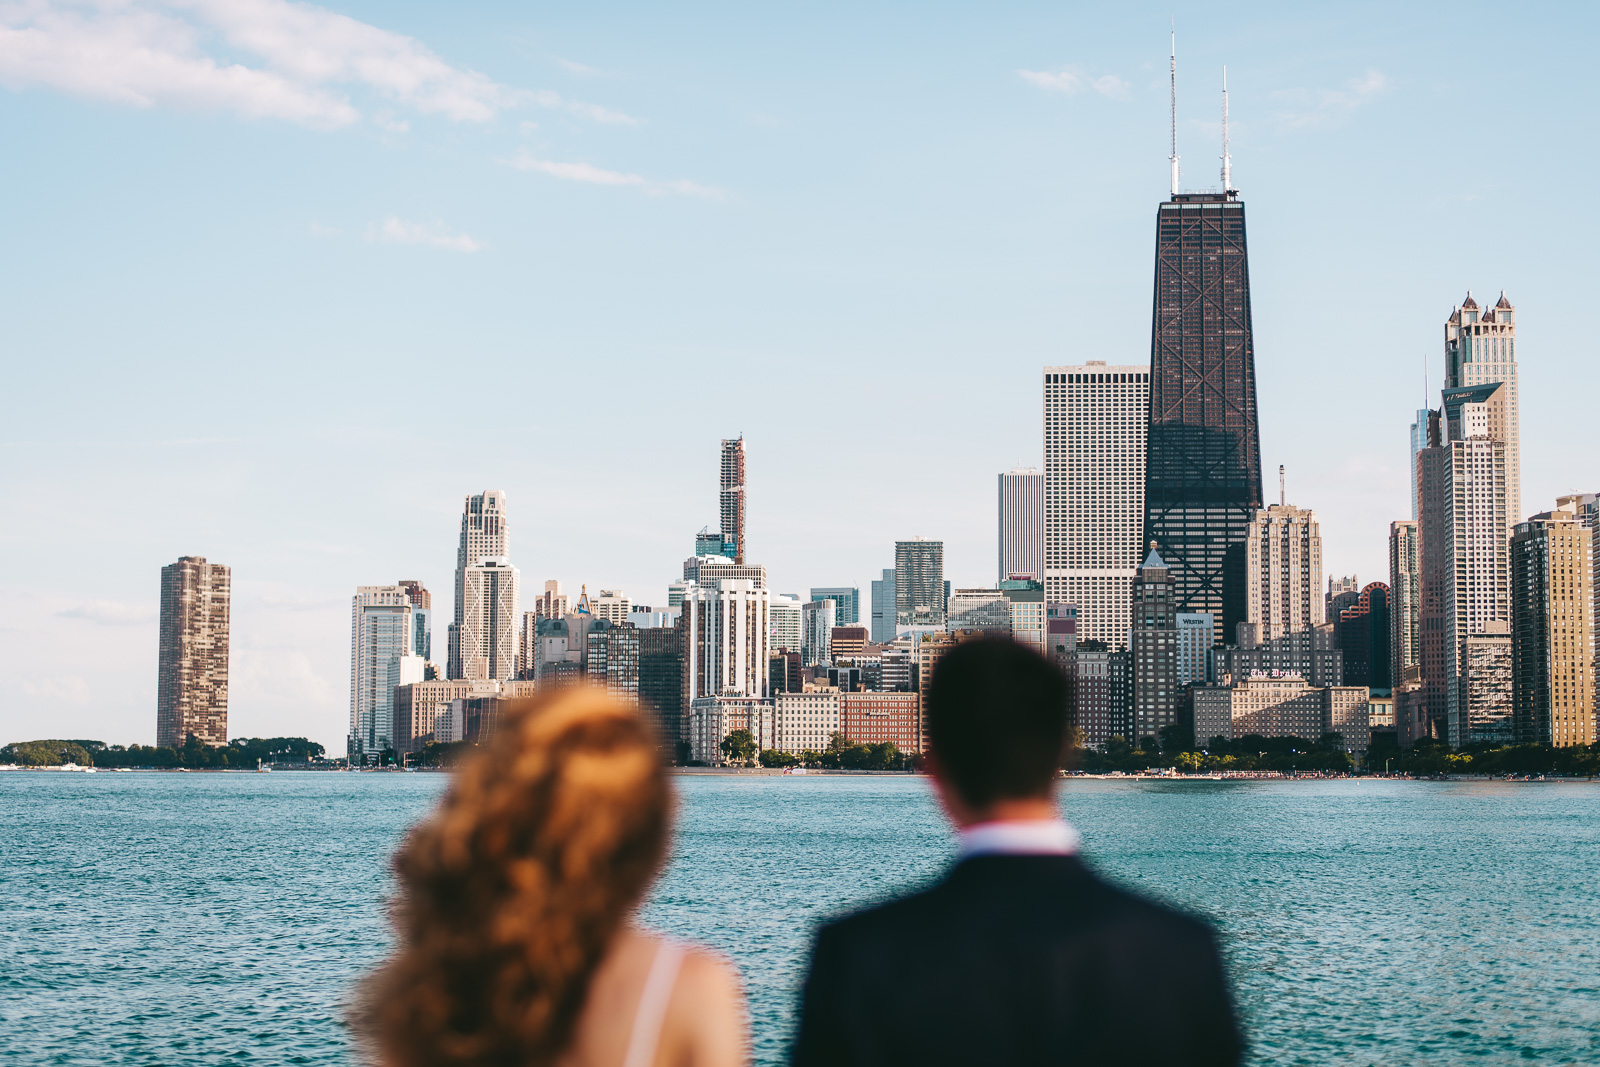 07 proposing to my girlfriend - Chicago Skyline Proposal // Chris + Chrissi